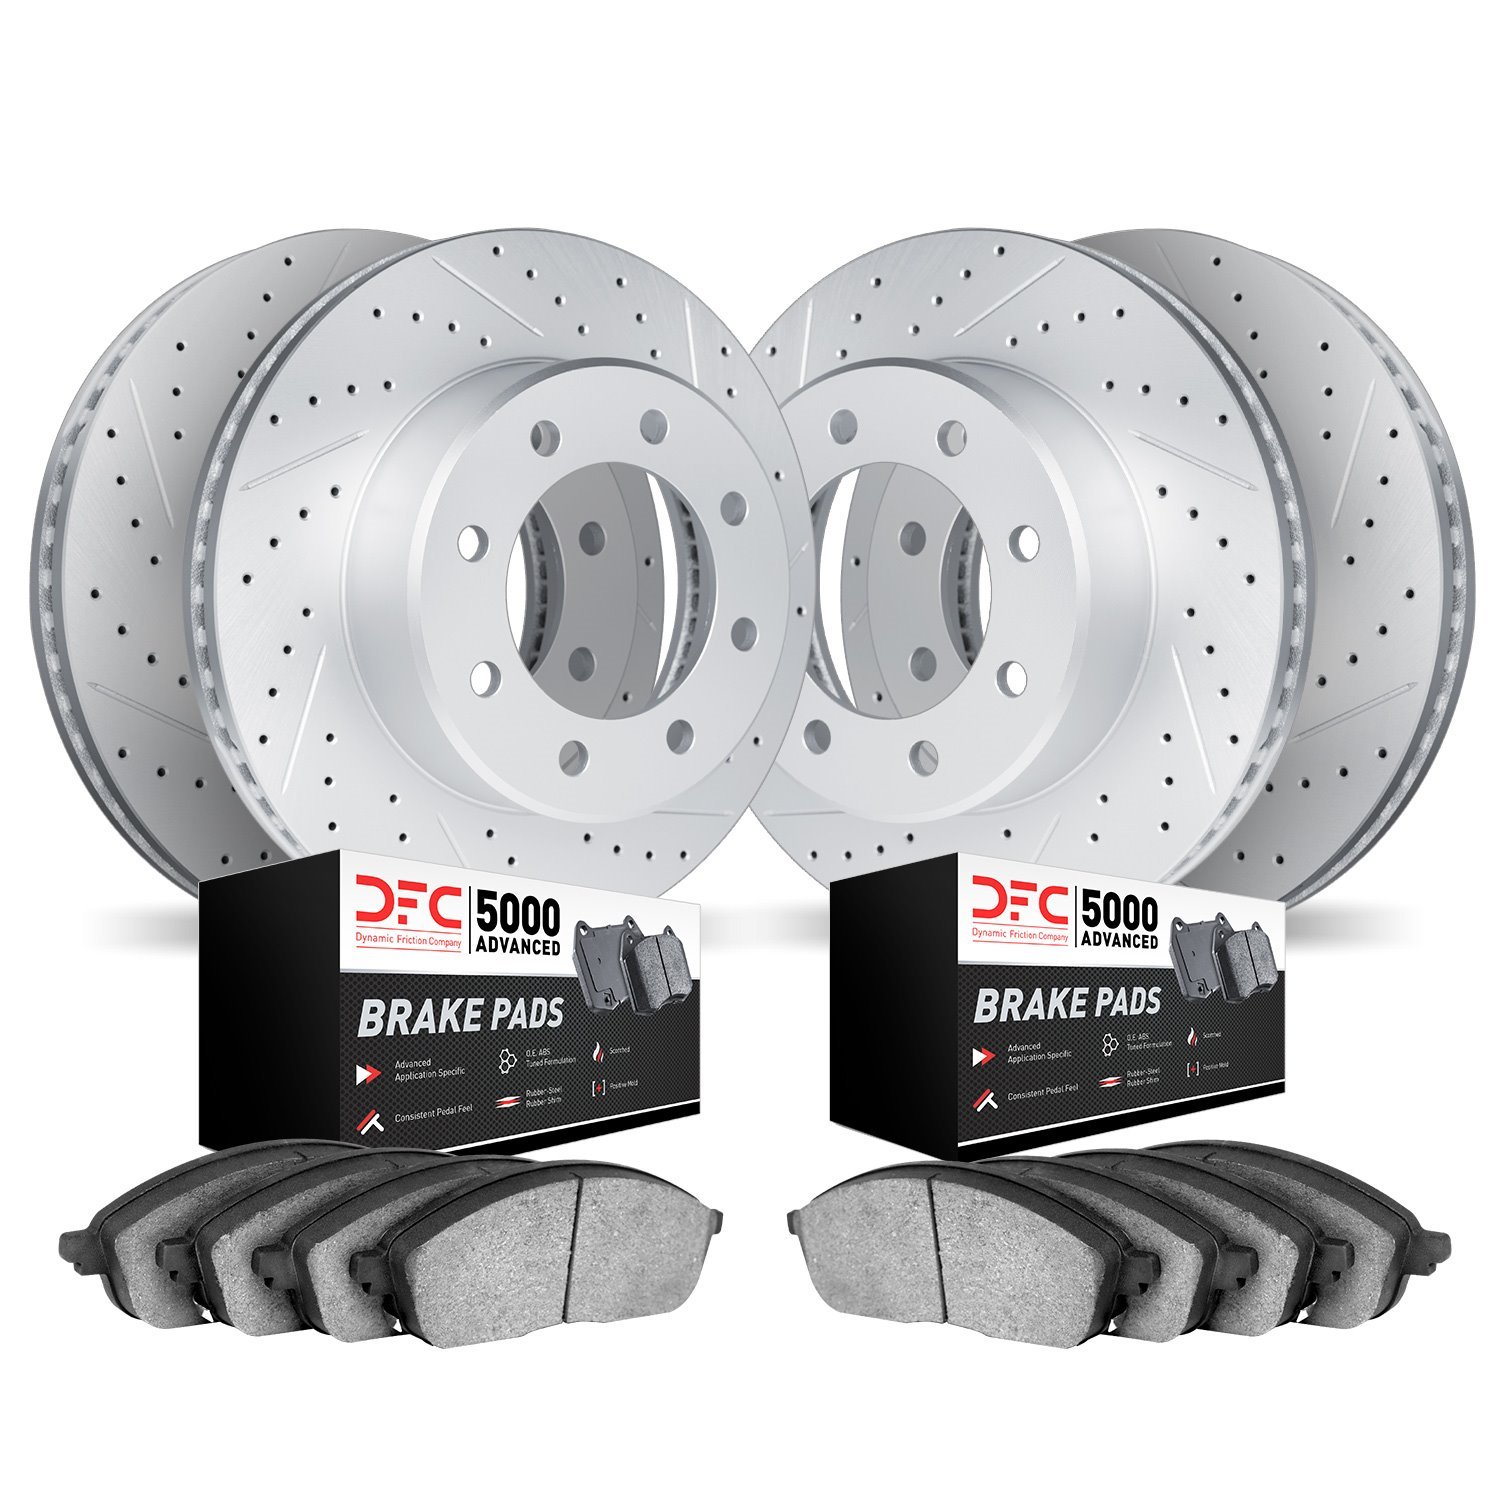 2504-54229 Geoperformance Drilled/Slotted Rotors w/5000 Advanced Brake Pads Kit, 1999-2000 Ford/Lincoln/Mercury/Mazda, Position: